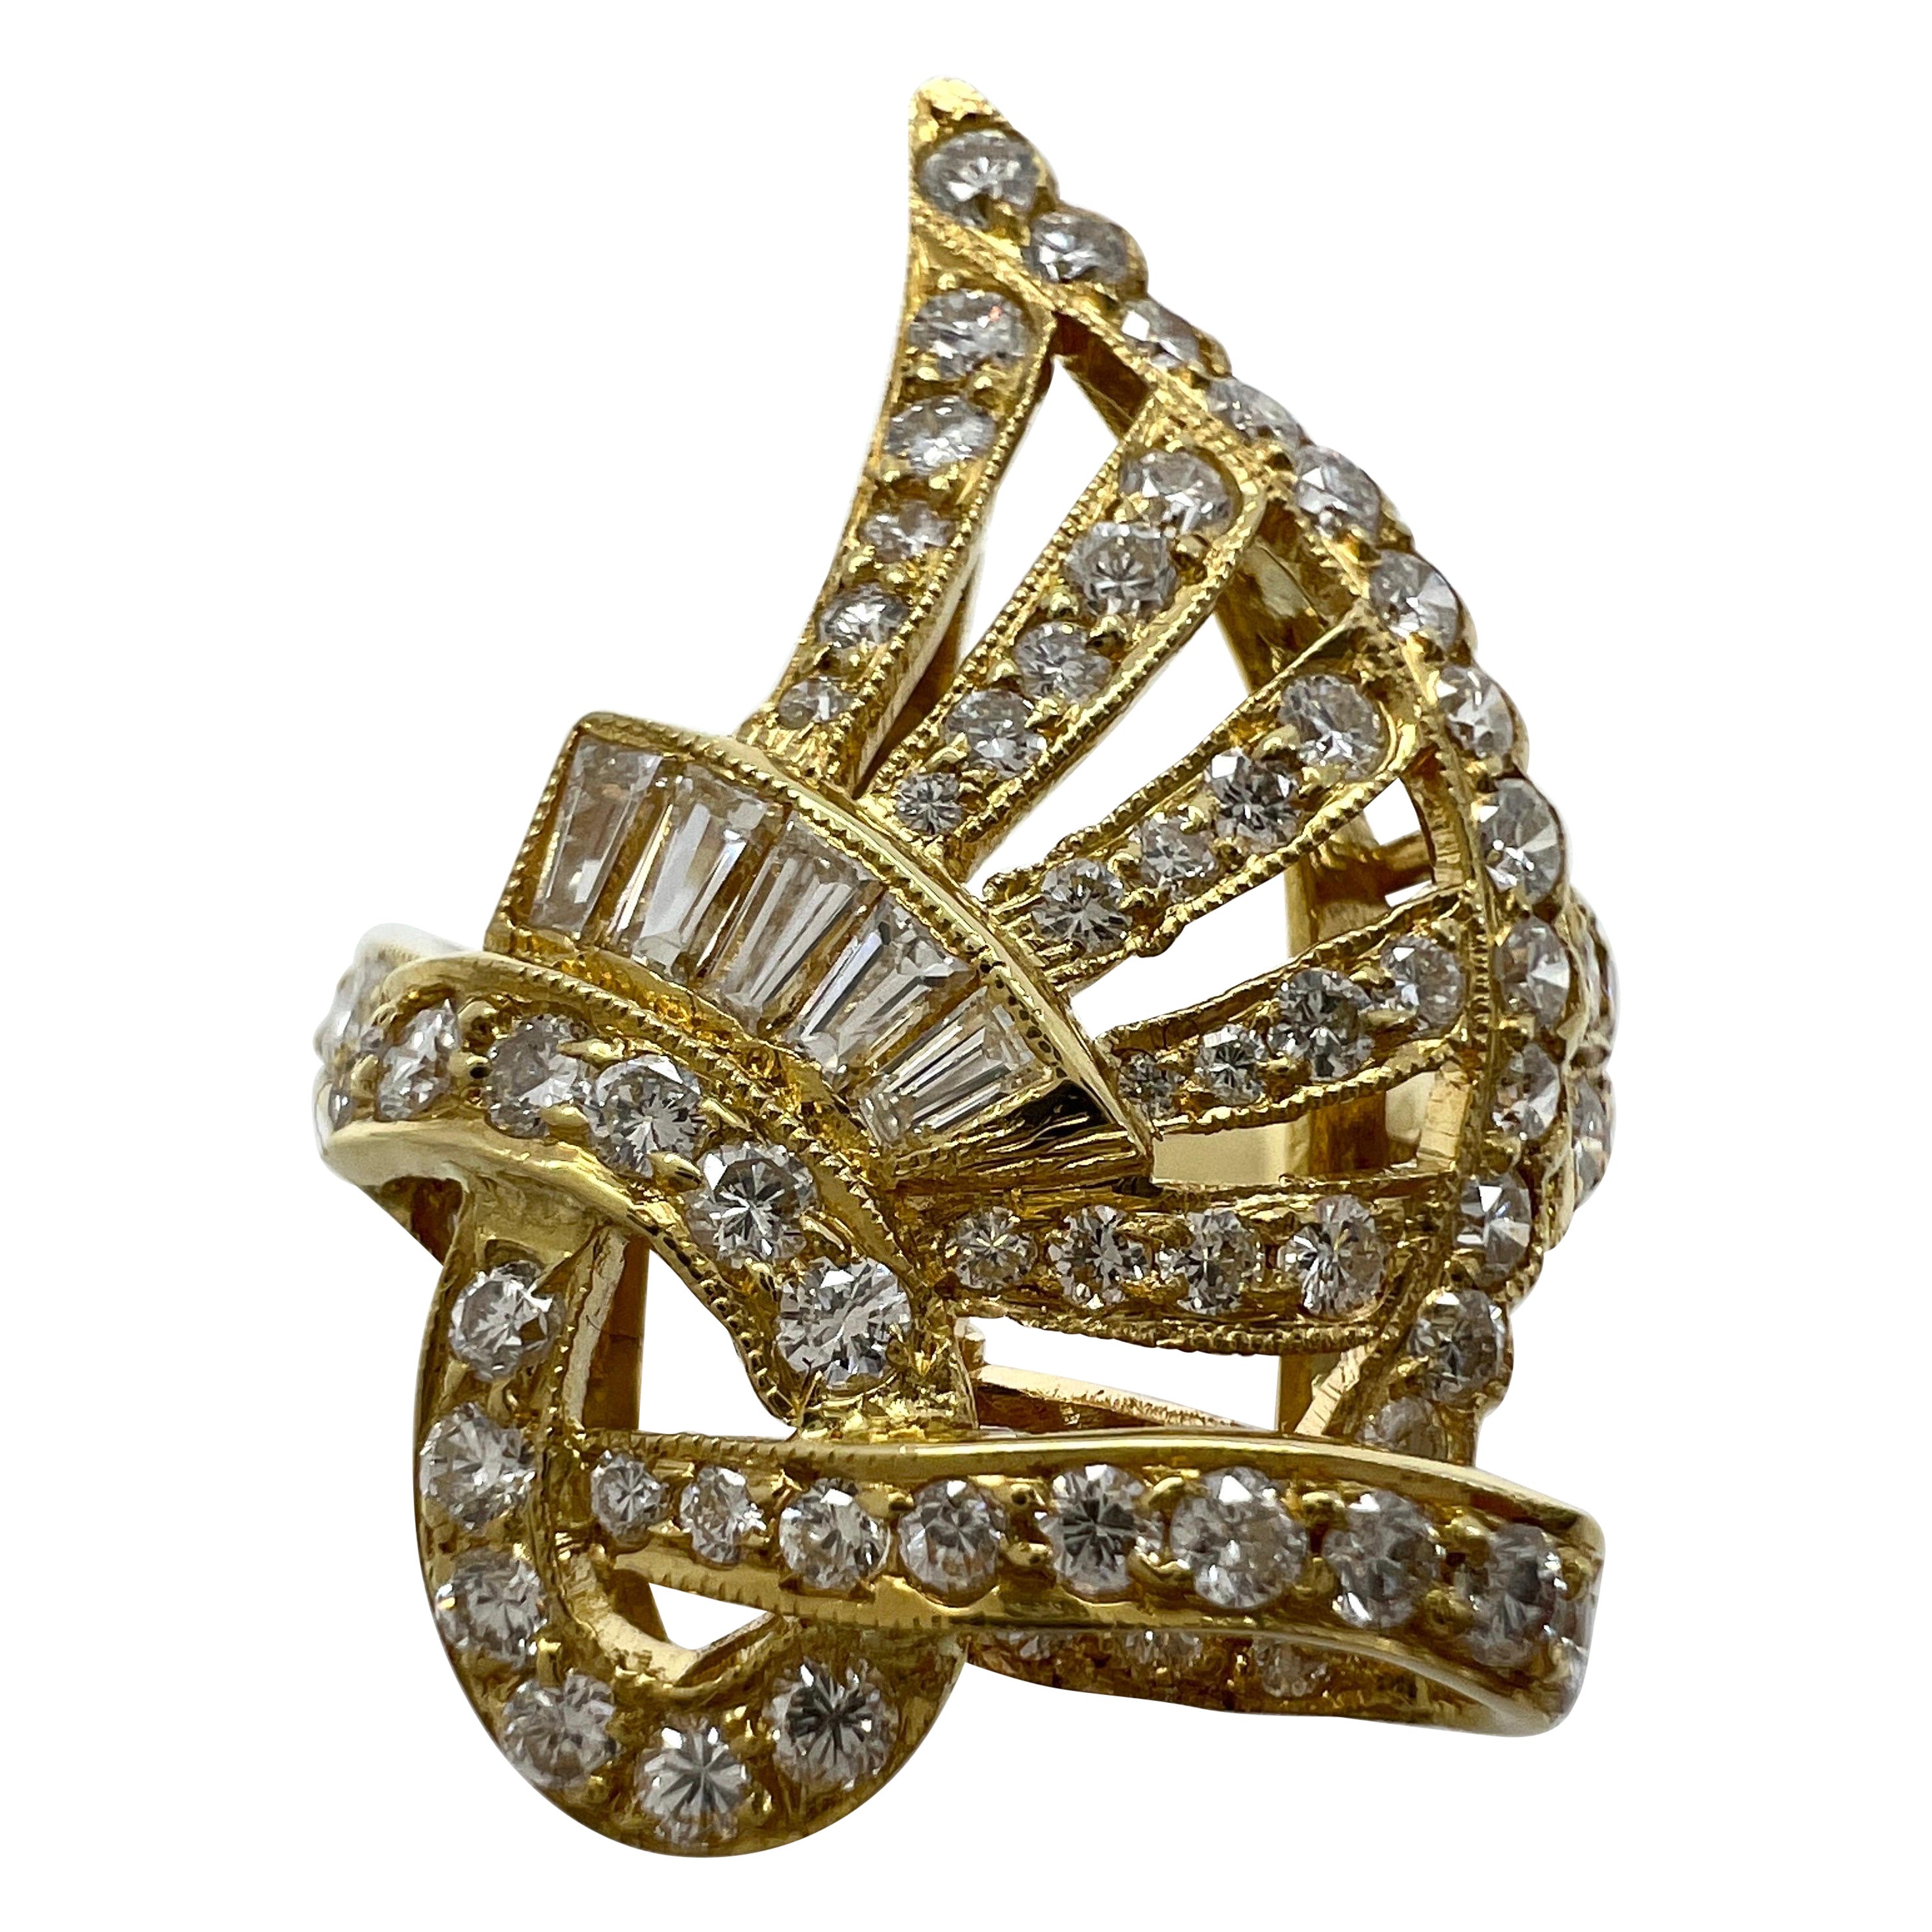 1.26ct Fancy White Diamond Swirl Round & Baguette Cut 18k Gold Statement Ring For Sale